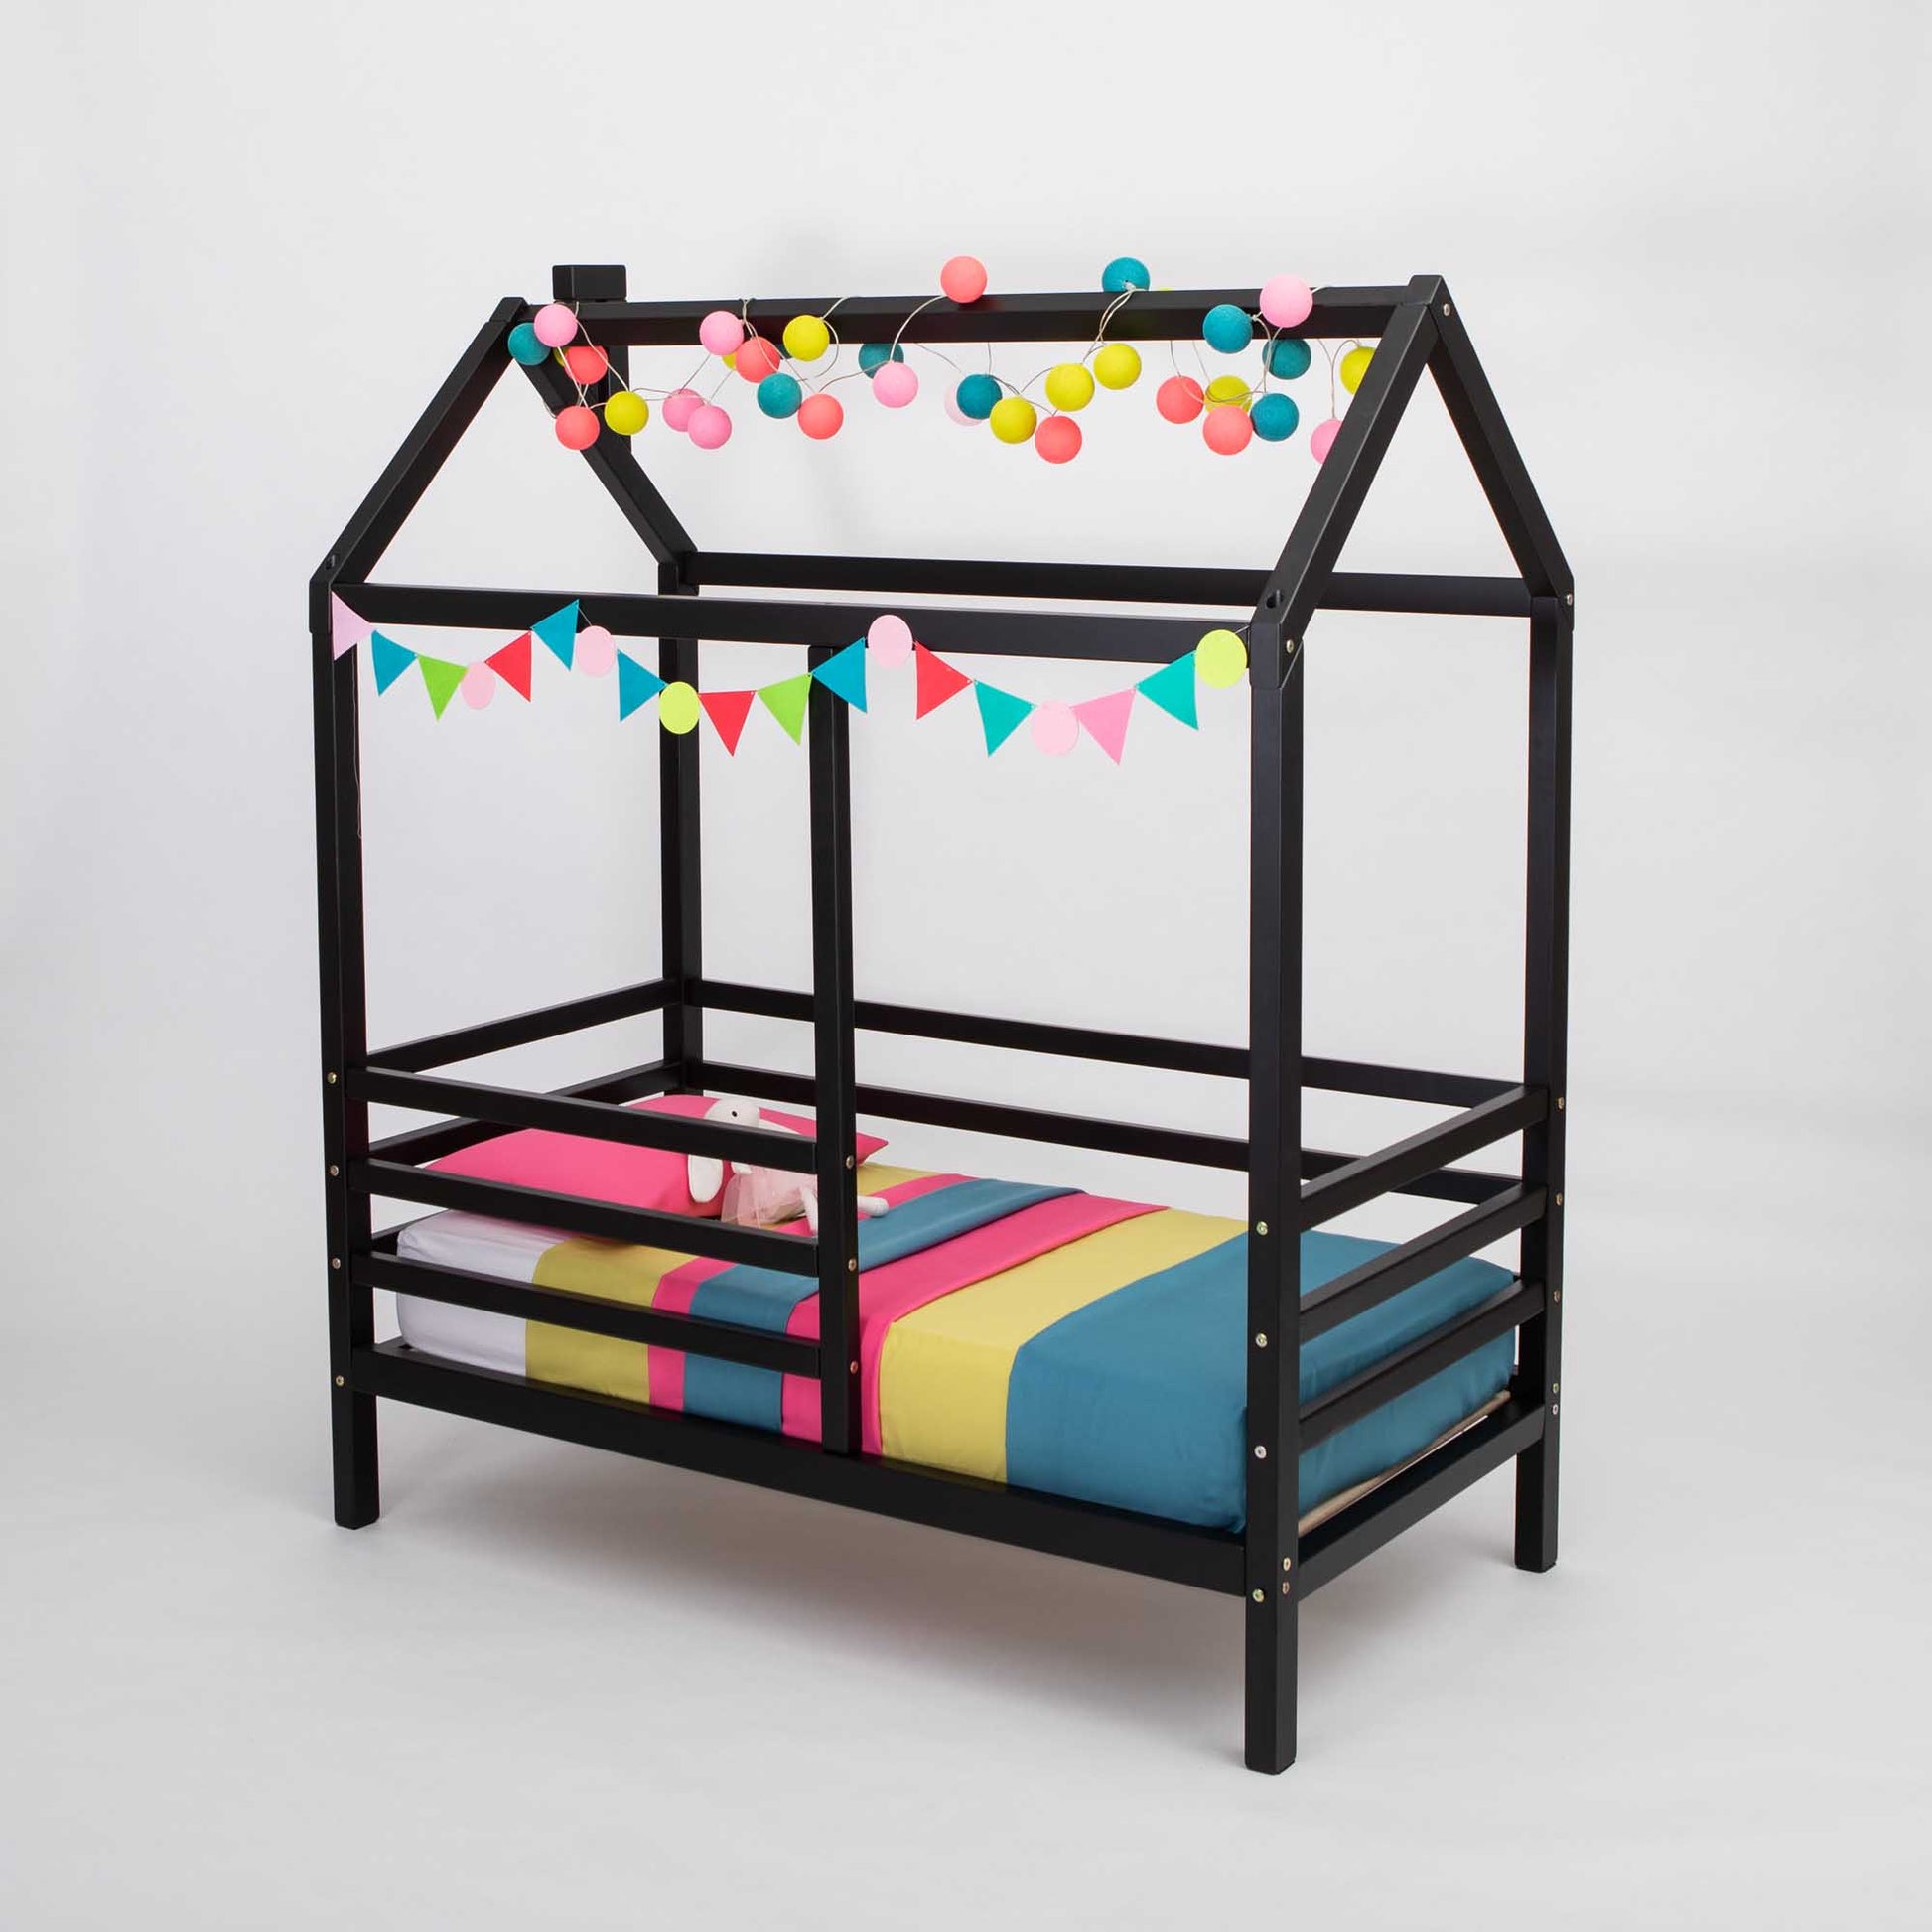 A wooden house bed on legs with a fence decorated with colorful pom poms.